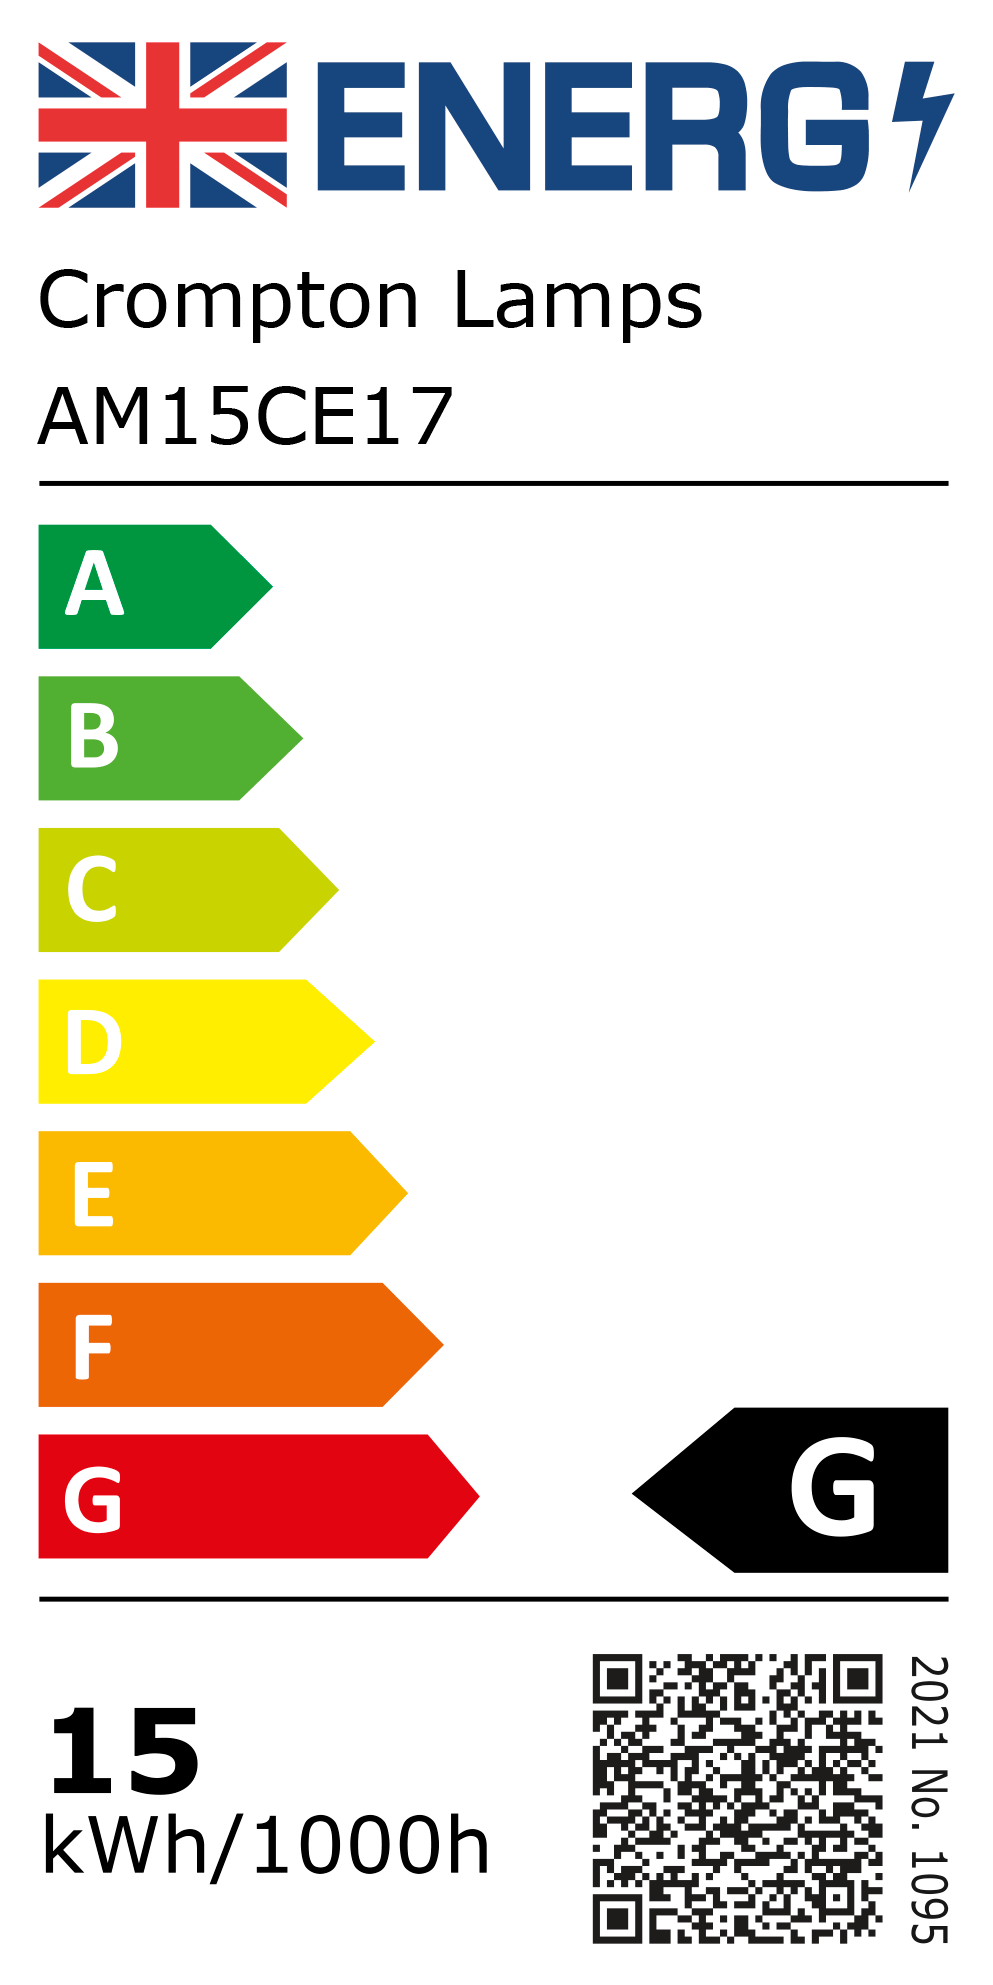 New 2021 Energy Rating Label: Stock Code AM15CE17